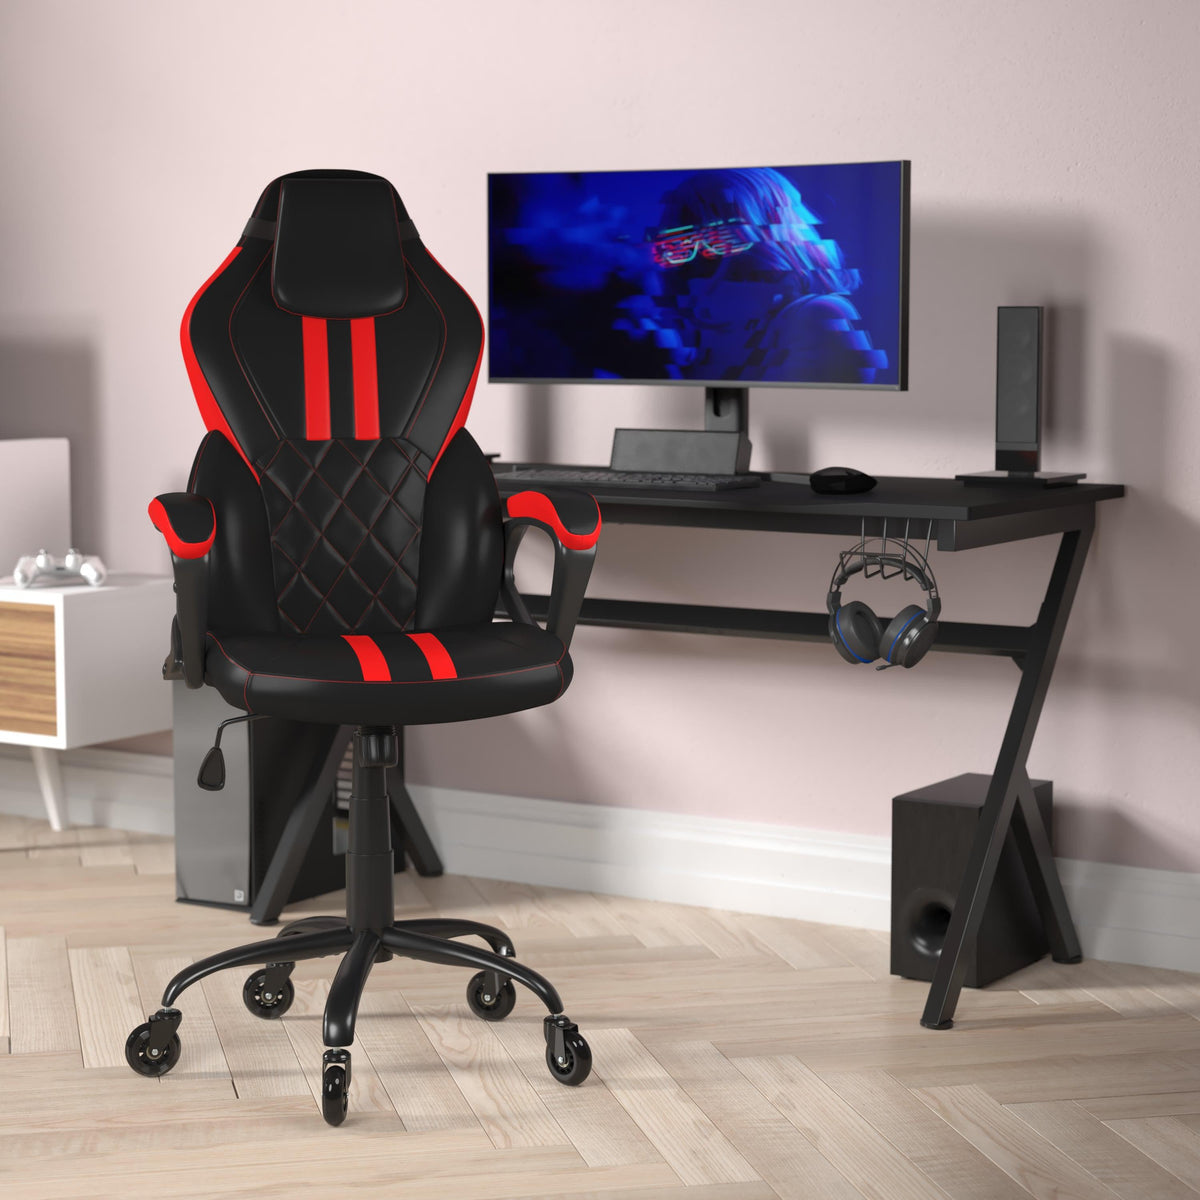 Adjustable 360° Swivel Gaming Chair with Roller Style Wheels in Black and Red